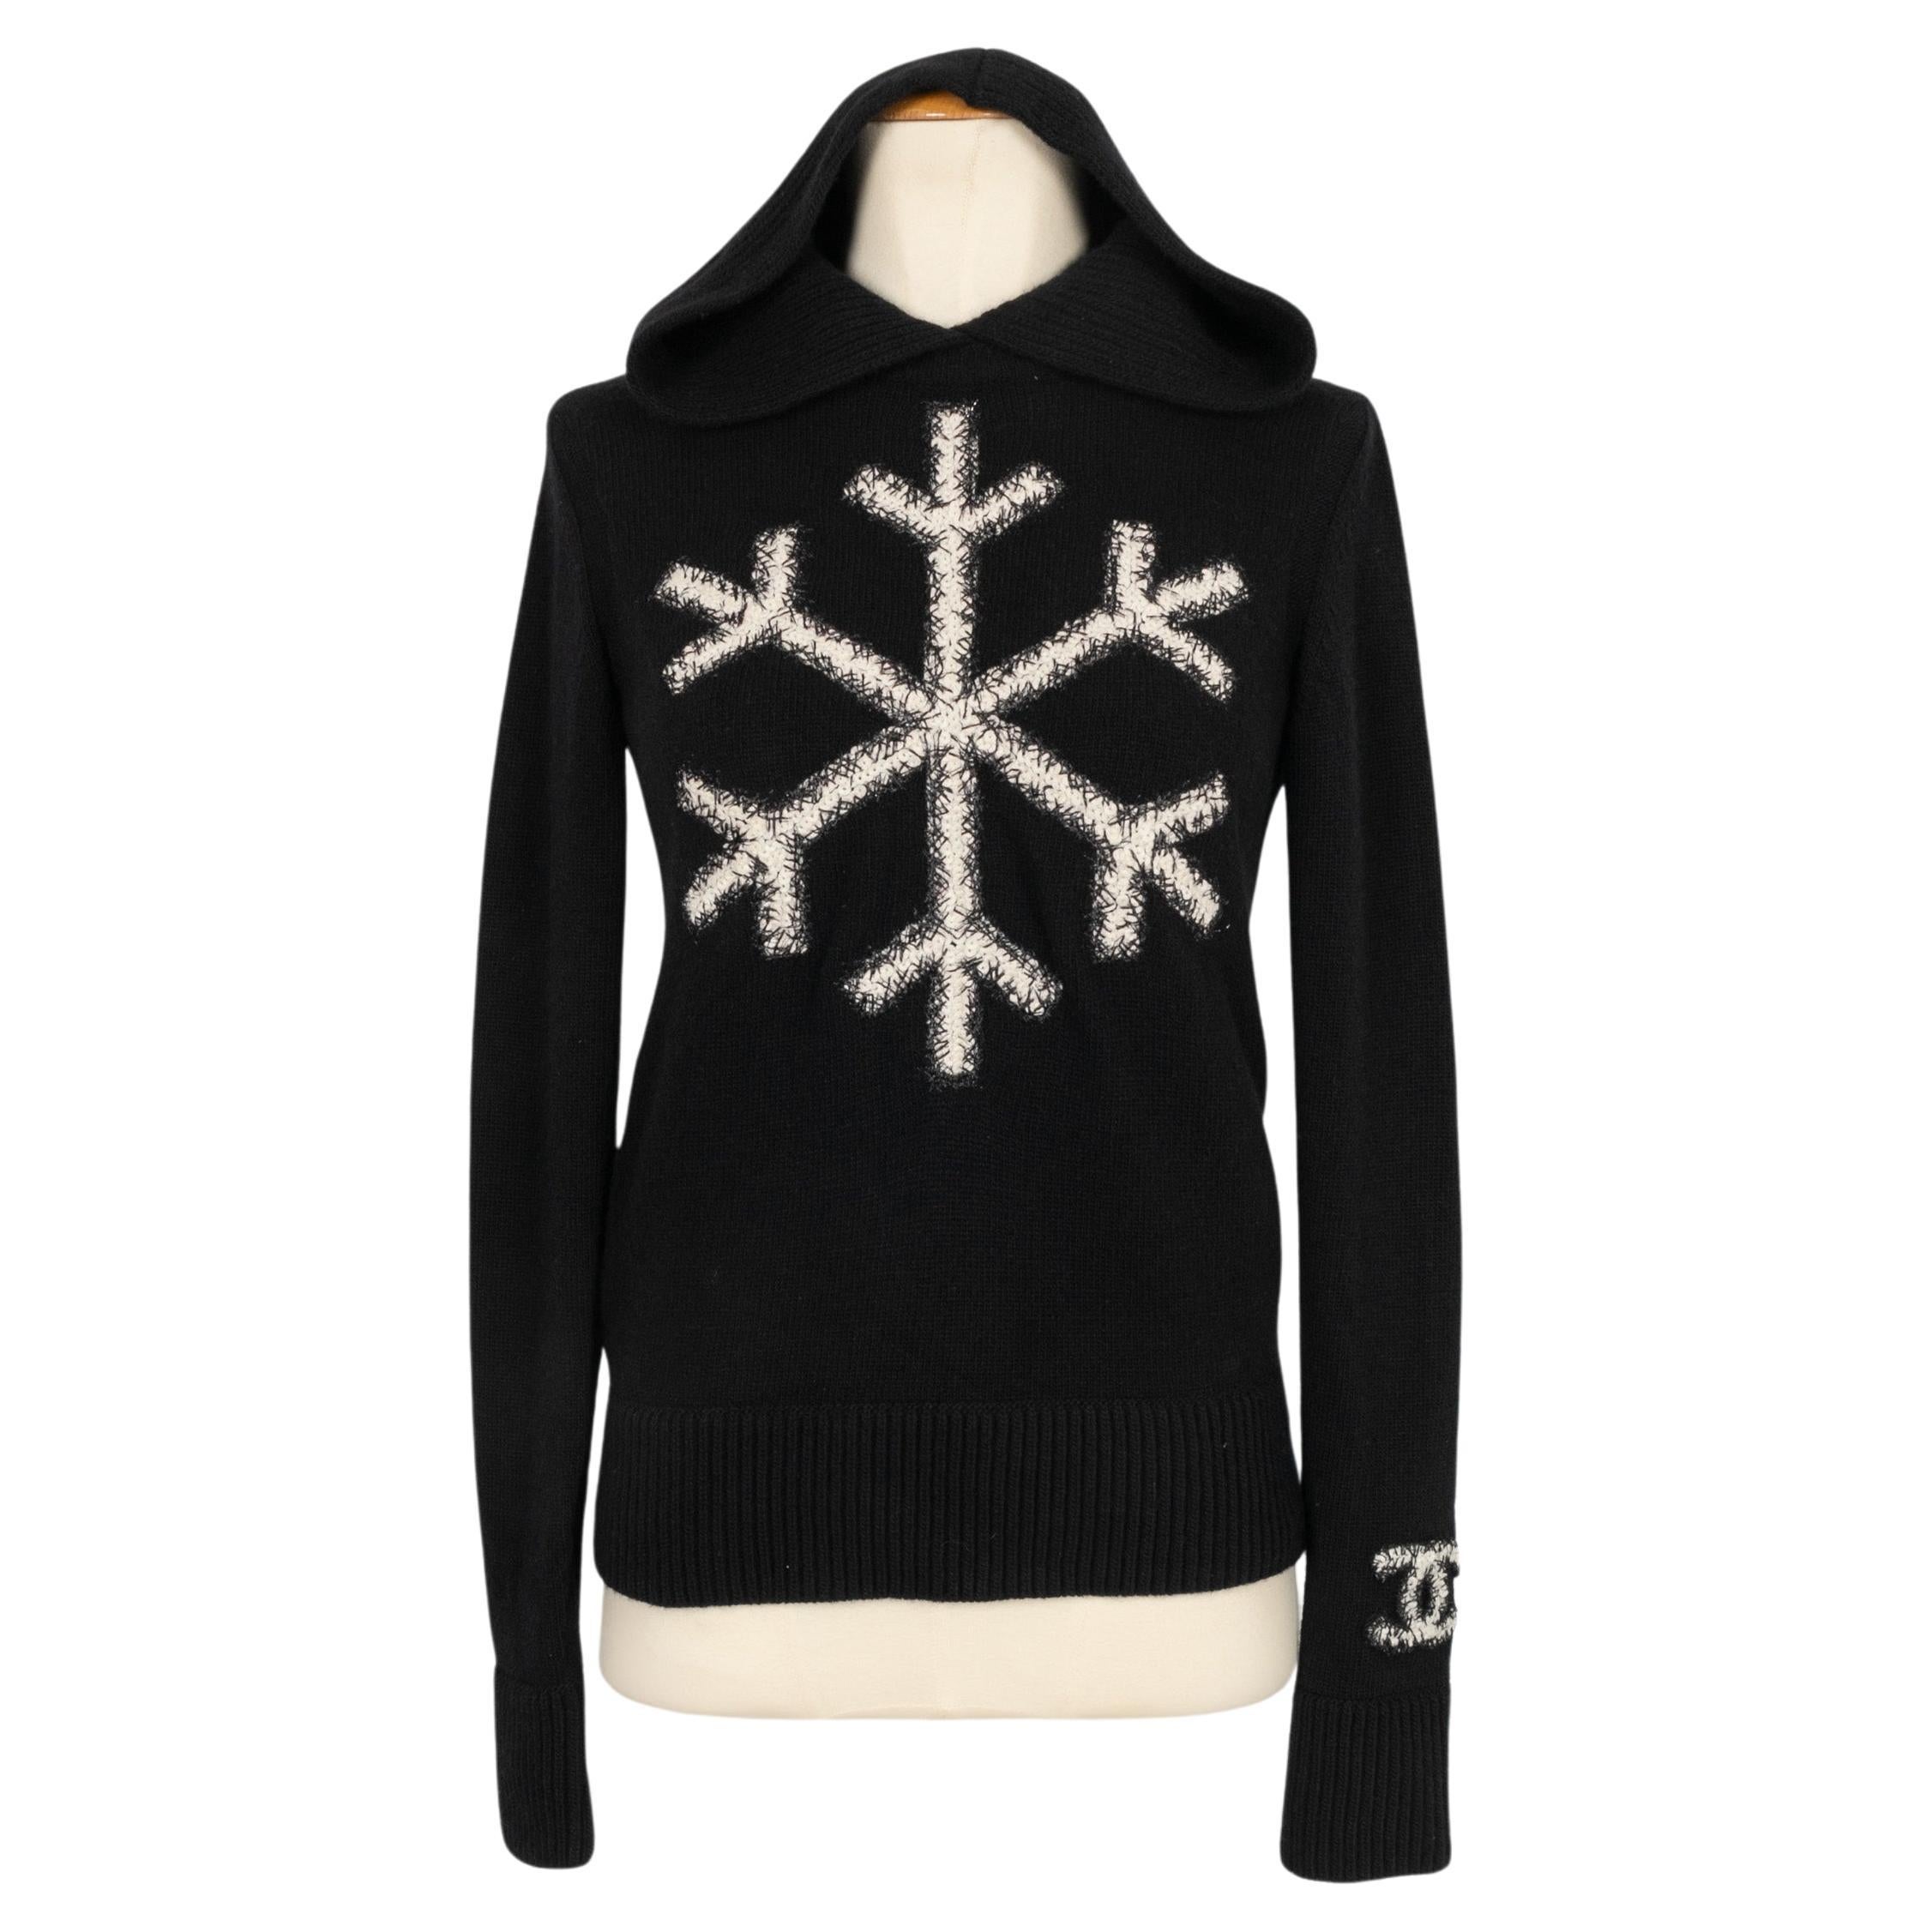 Chanel Black Wool Sweater with Snowflake Decorations